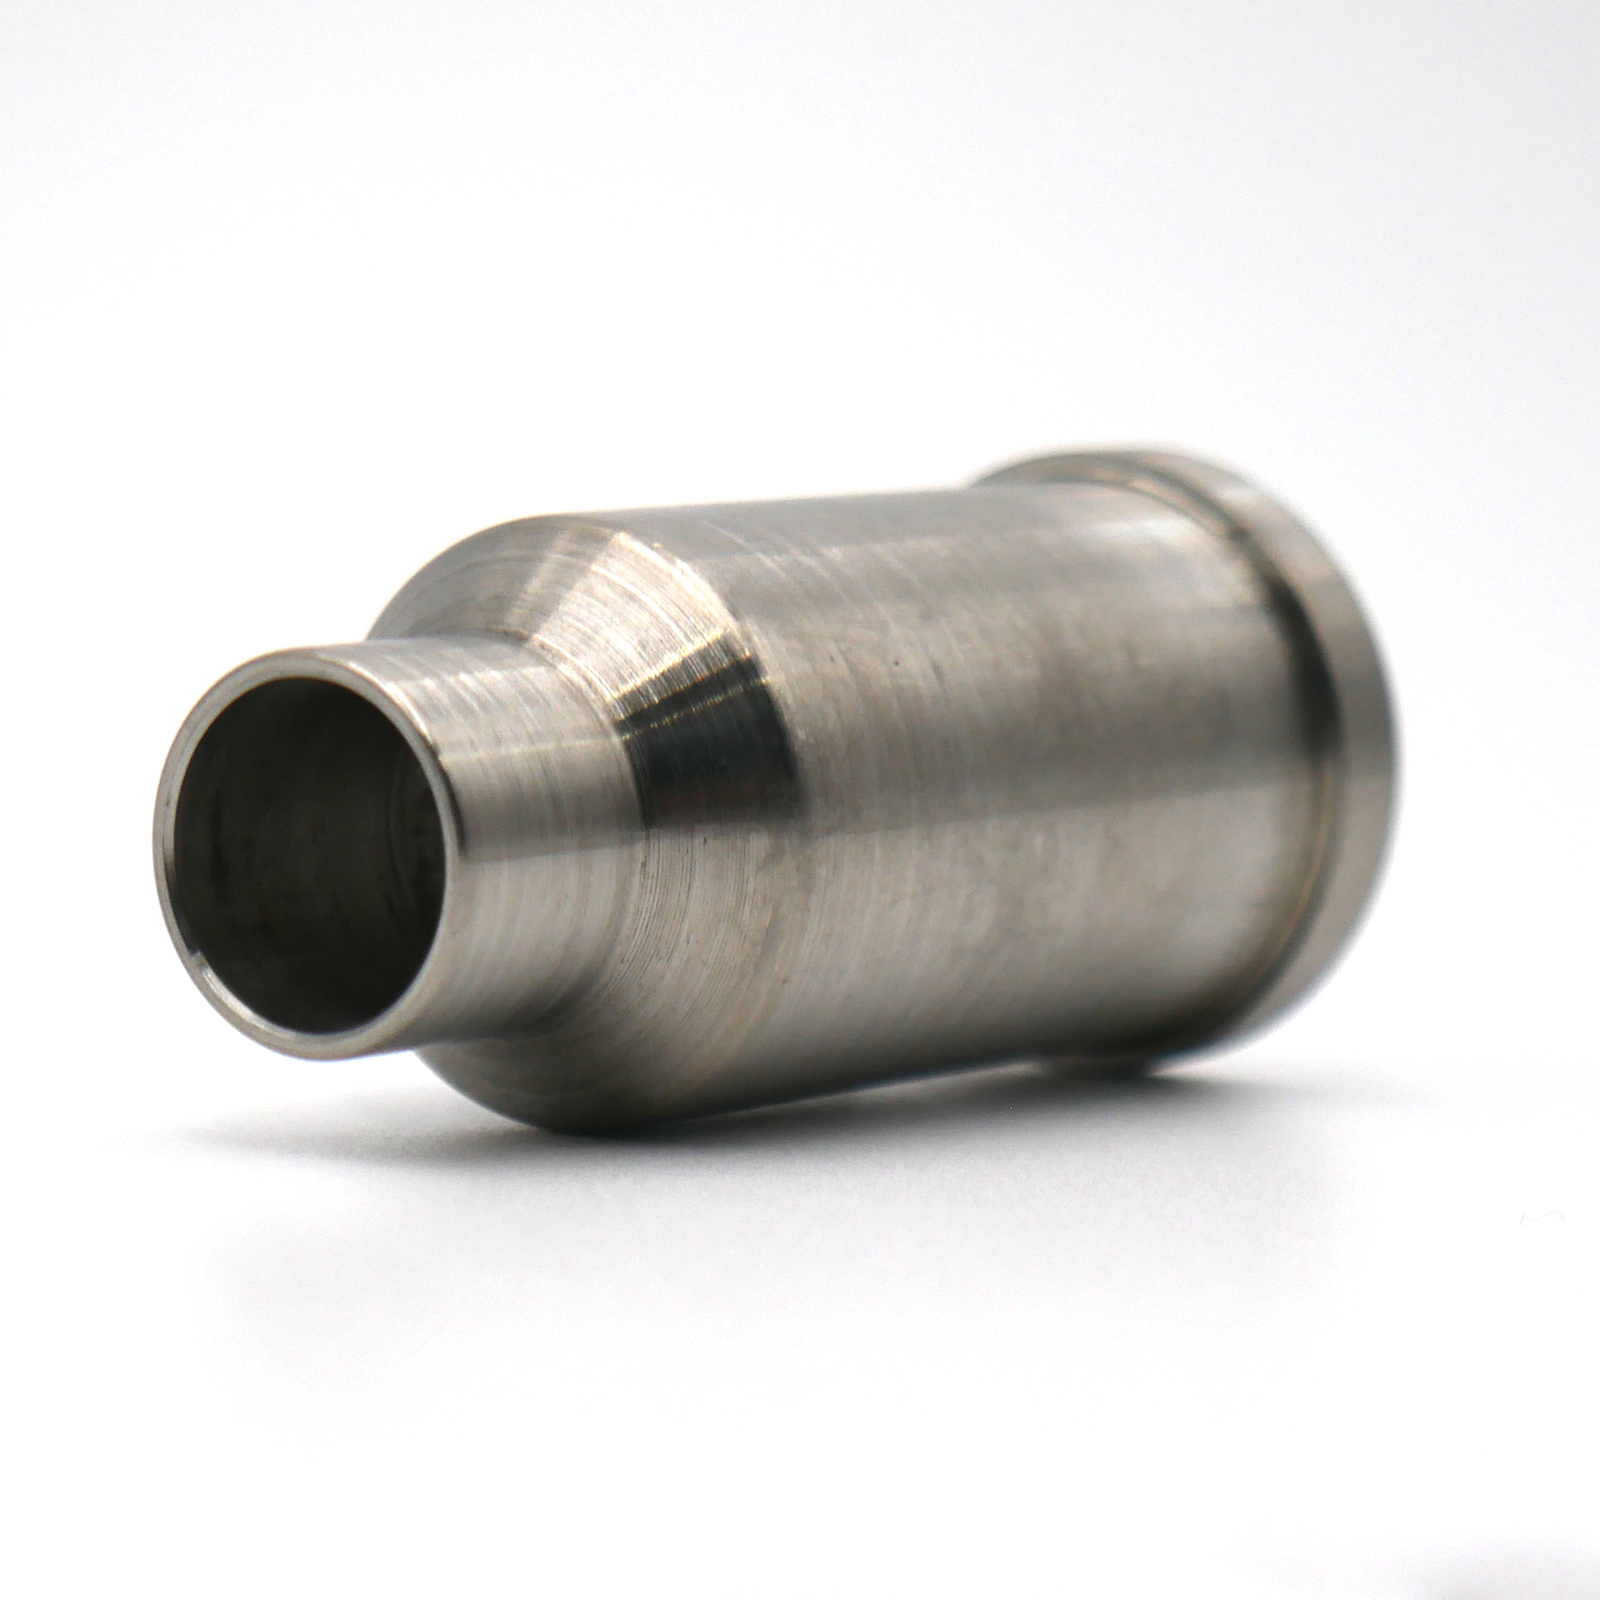 Type A 14mm Dispensing Nozzle Filling Tip